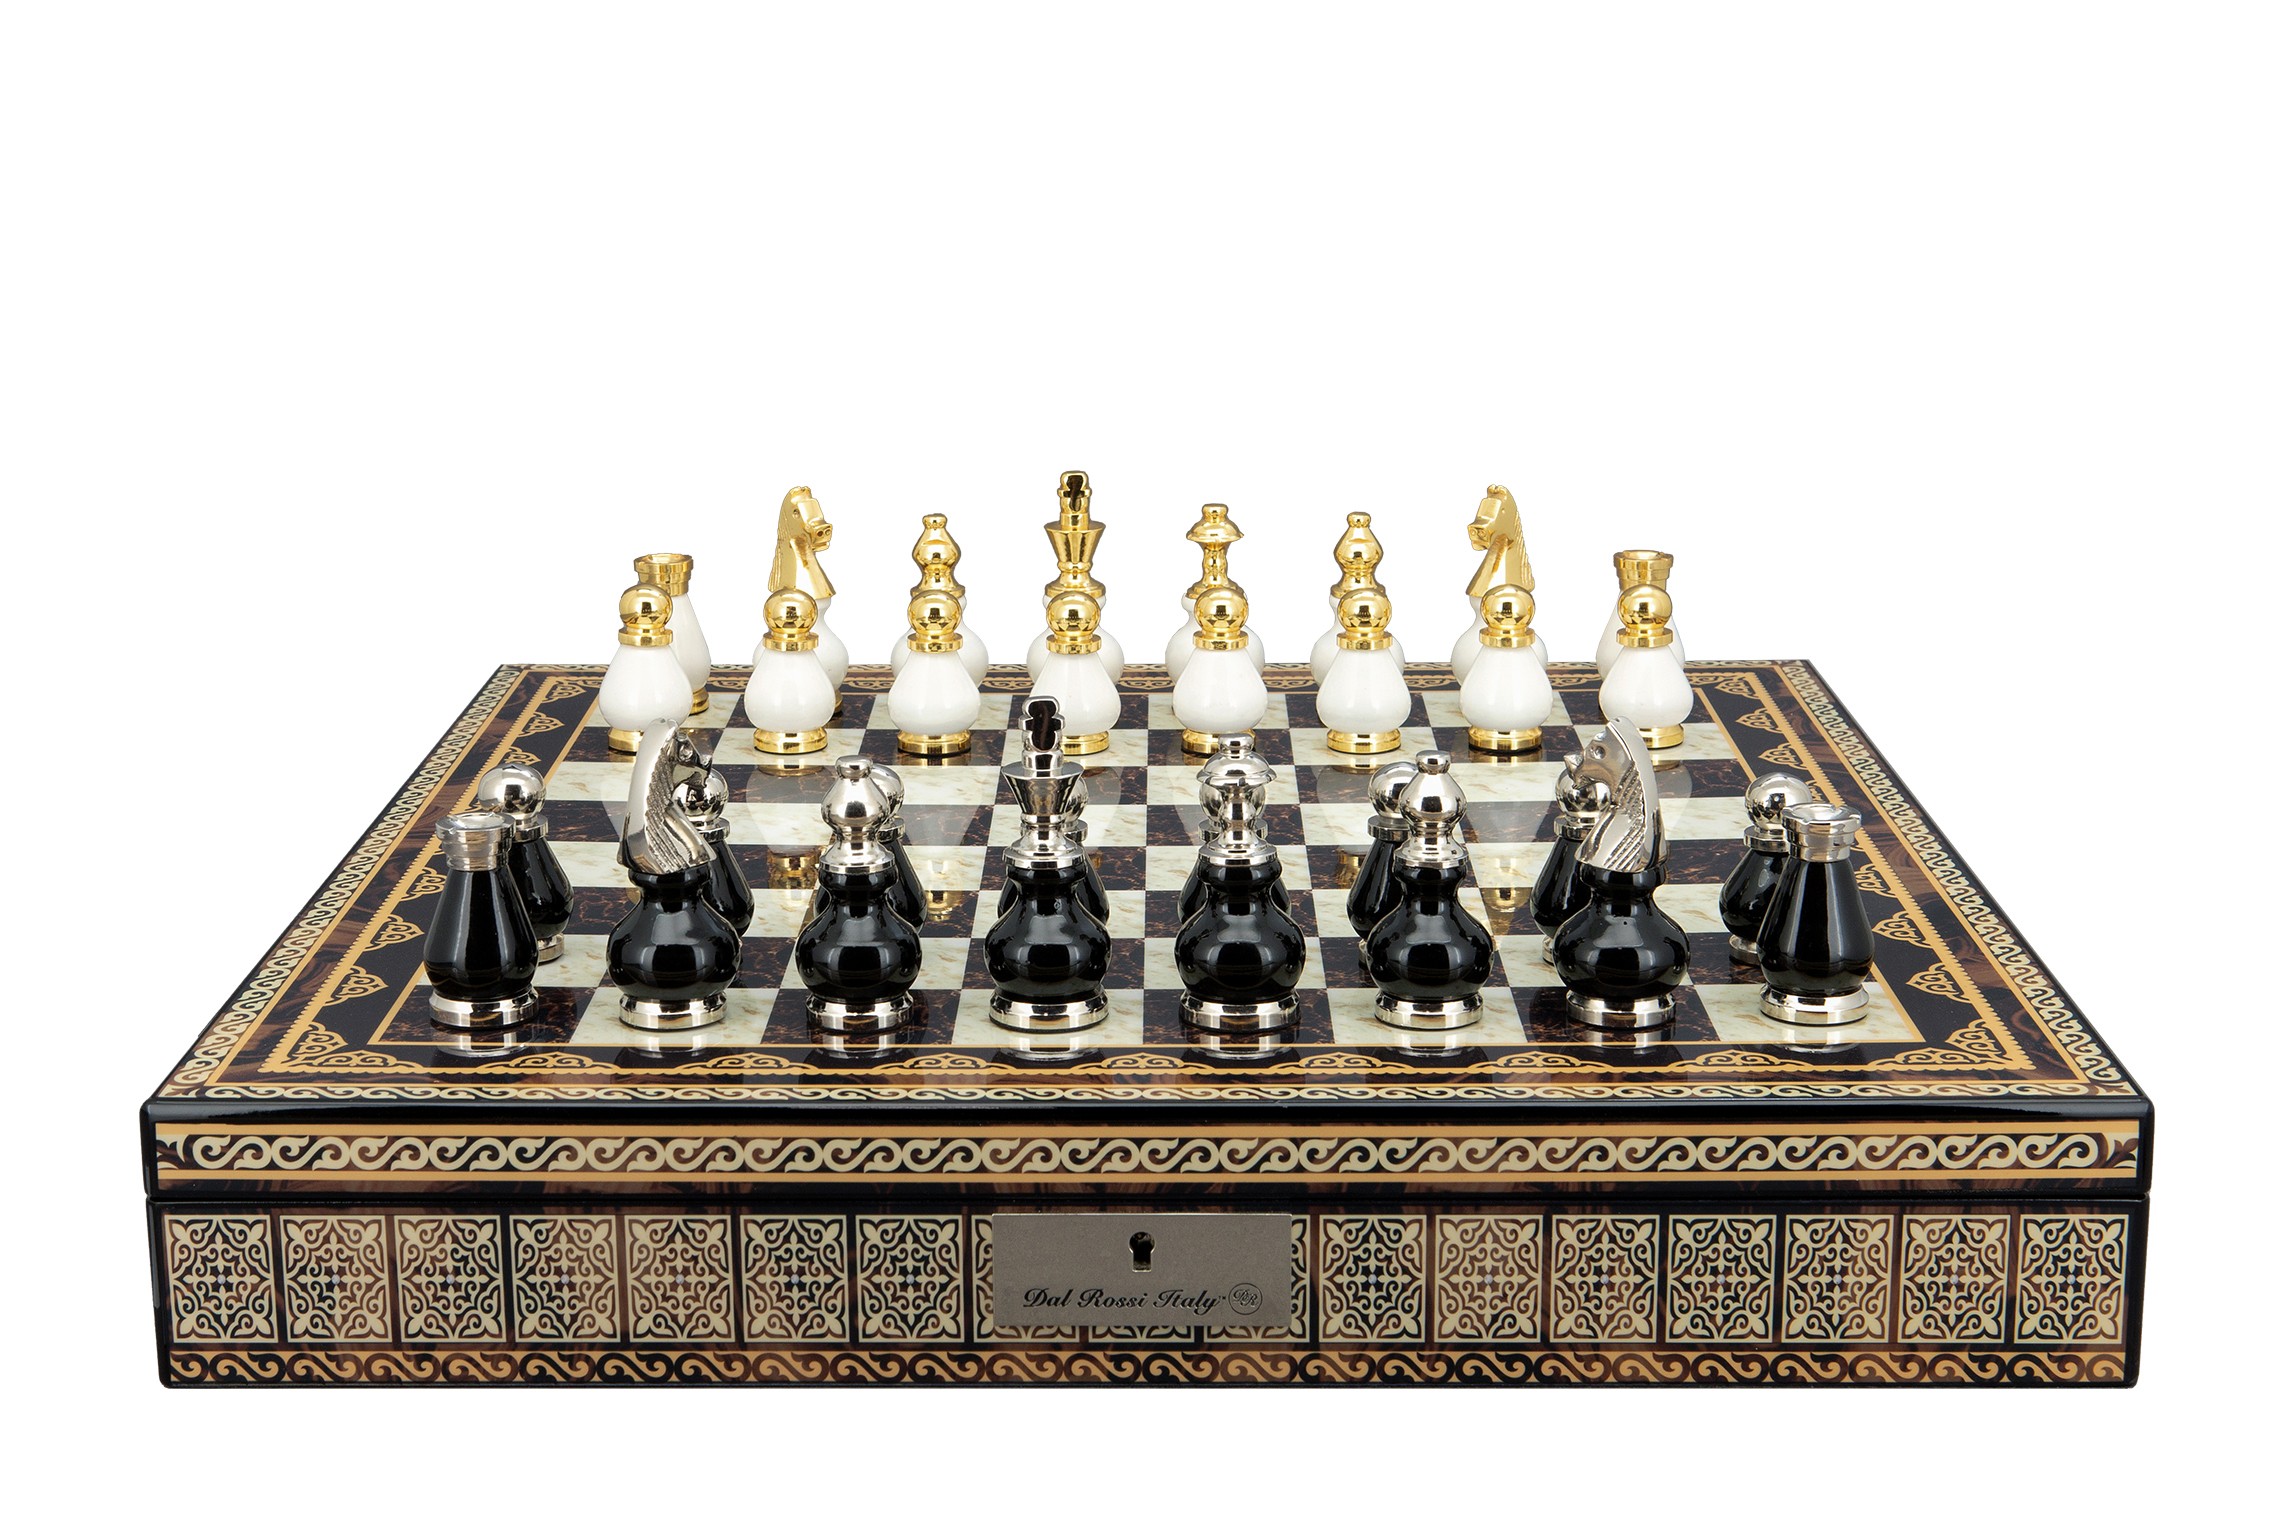 Dal Rossi Italy, Black and White with Gold and Silver Tops and Bottoms Chessmen 90mm on a Mosaic Finish Shiny Chess Box with Compartments 20"